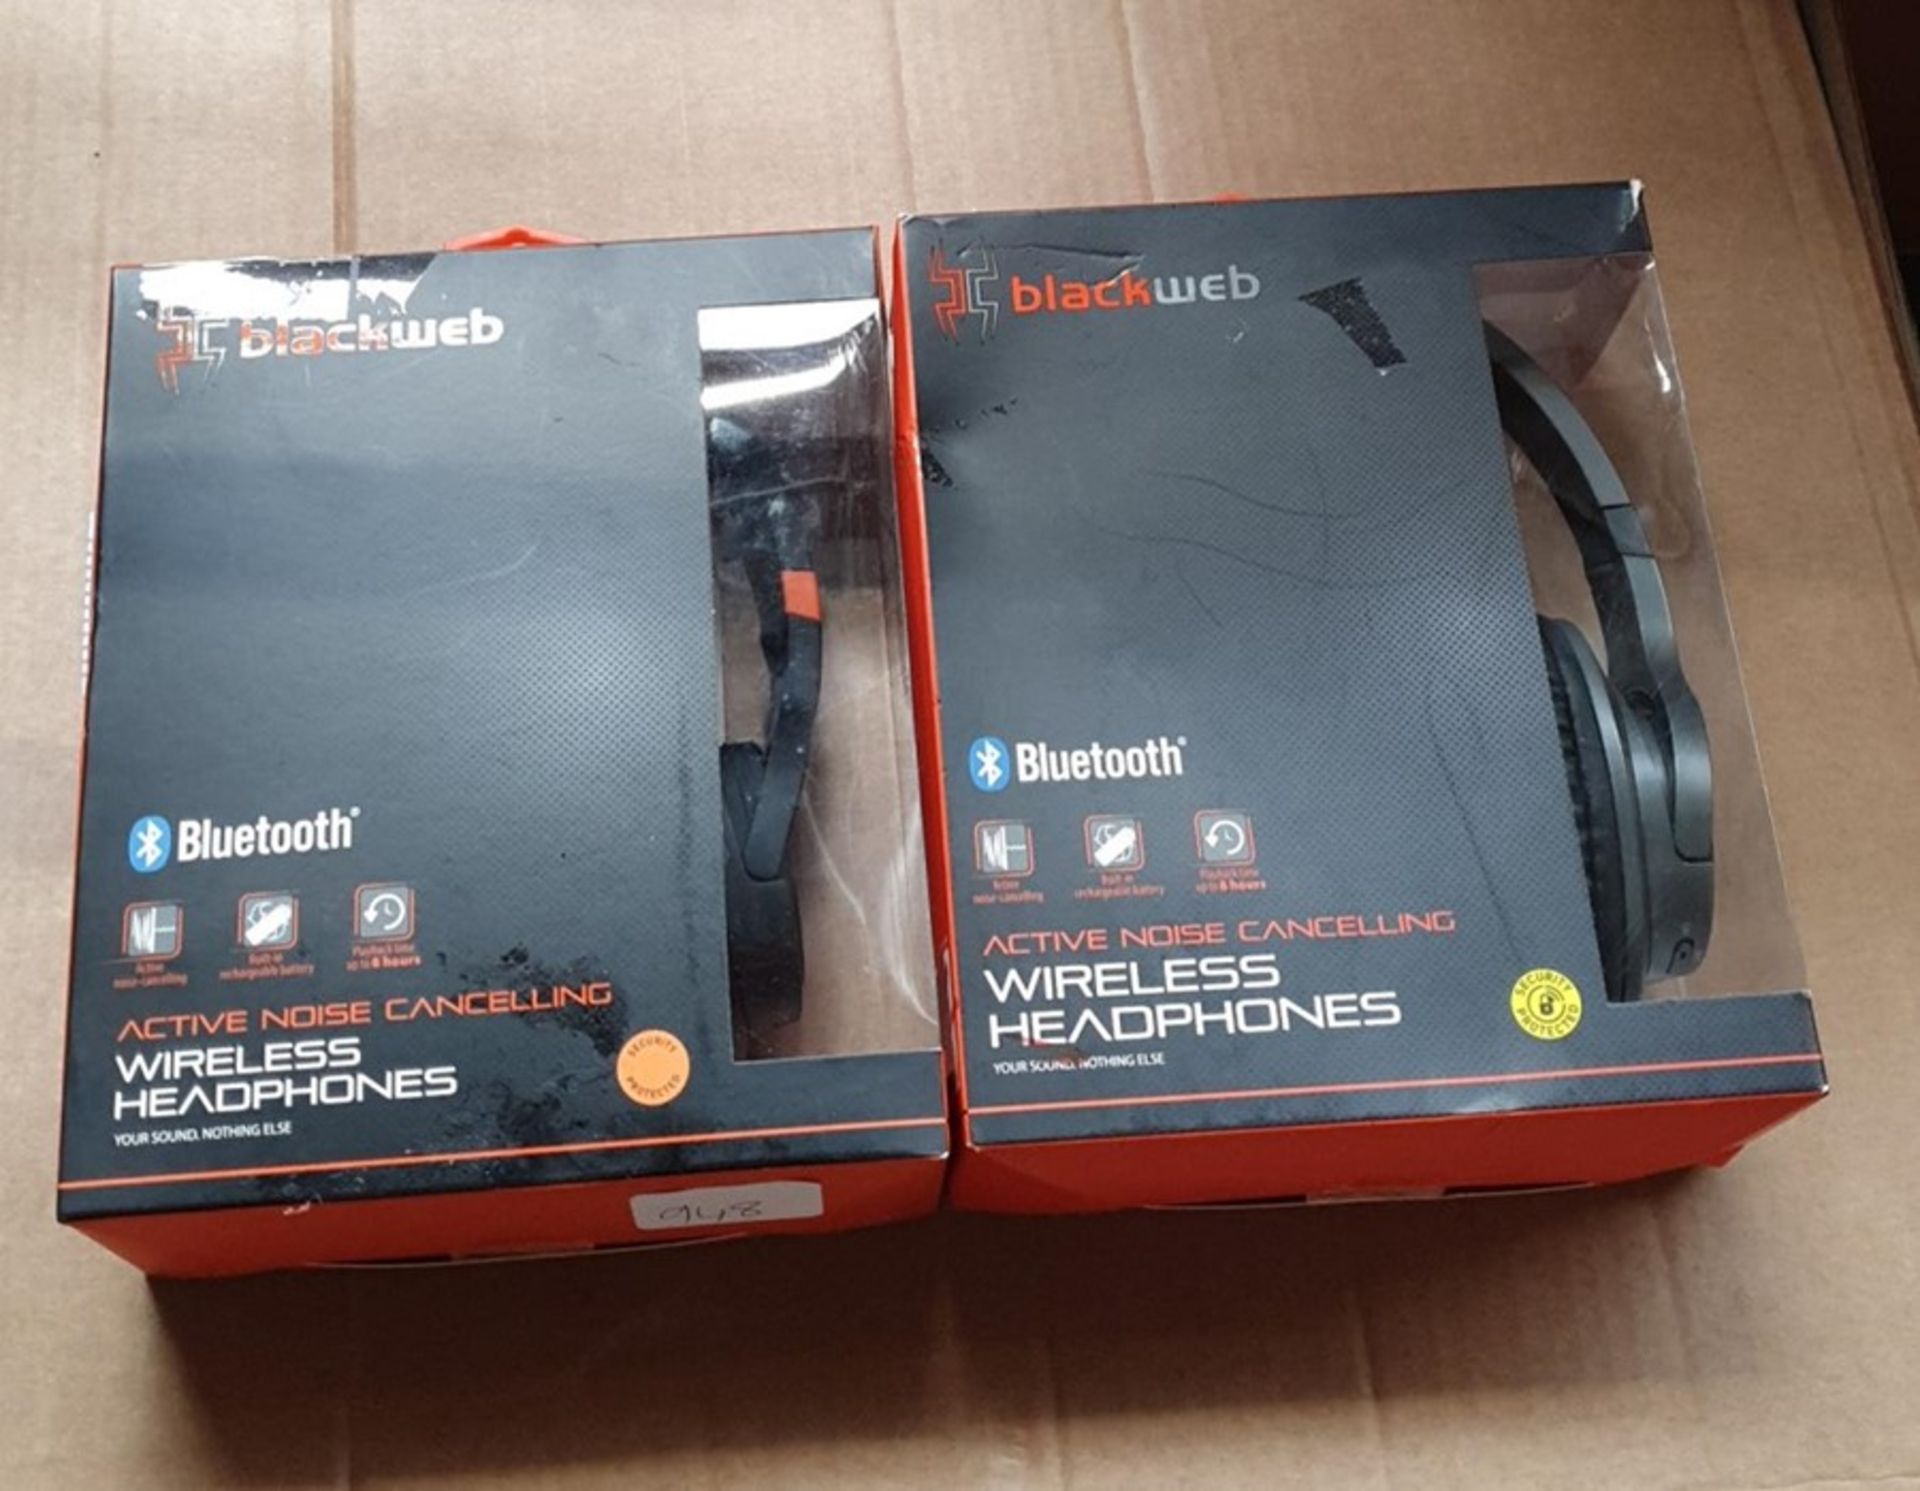 1 LOT TO CONTAIN 2 BLACKWEB BLUETOOTH ACTIVE NOISE CANCELLING WIRELESS HEADPHONES - BL 5589 / RRP £